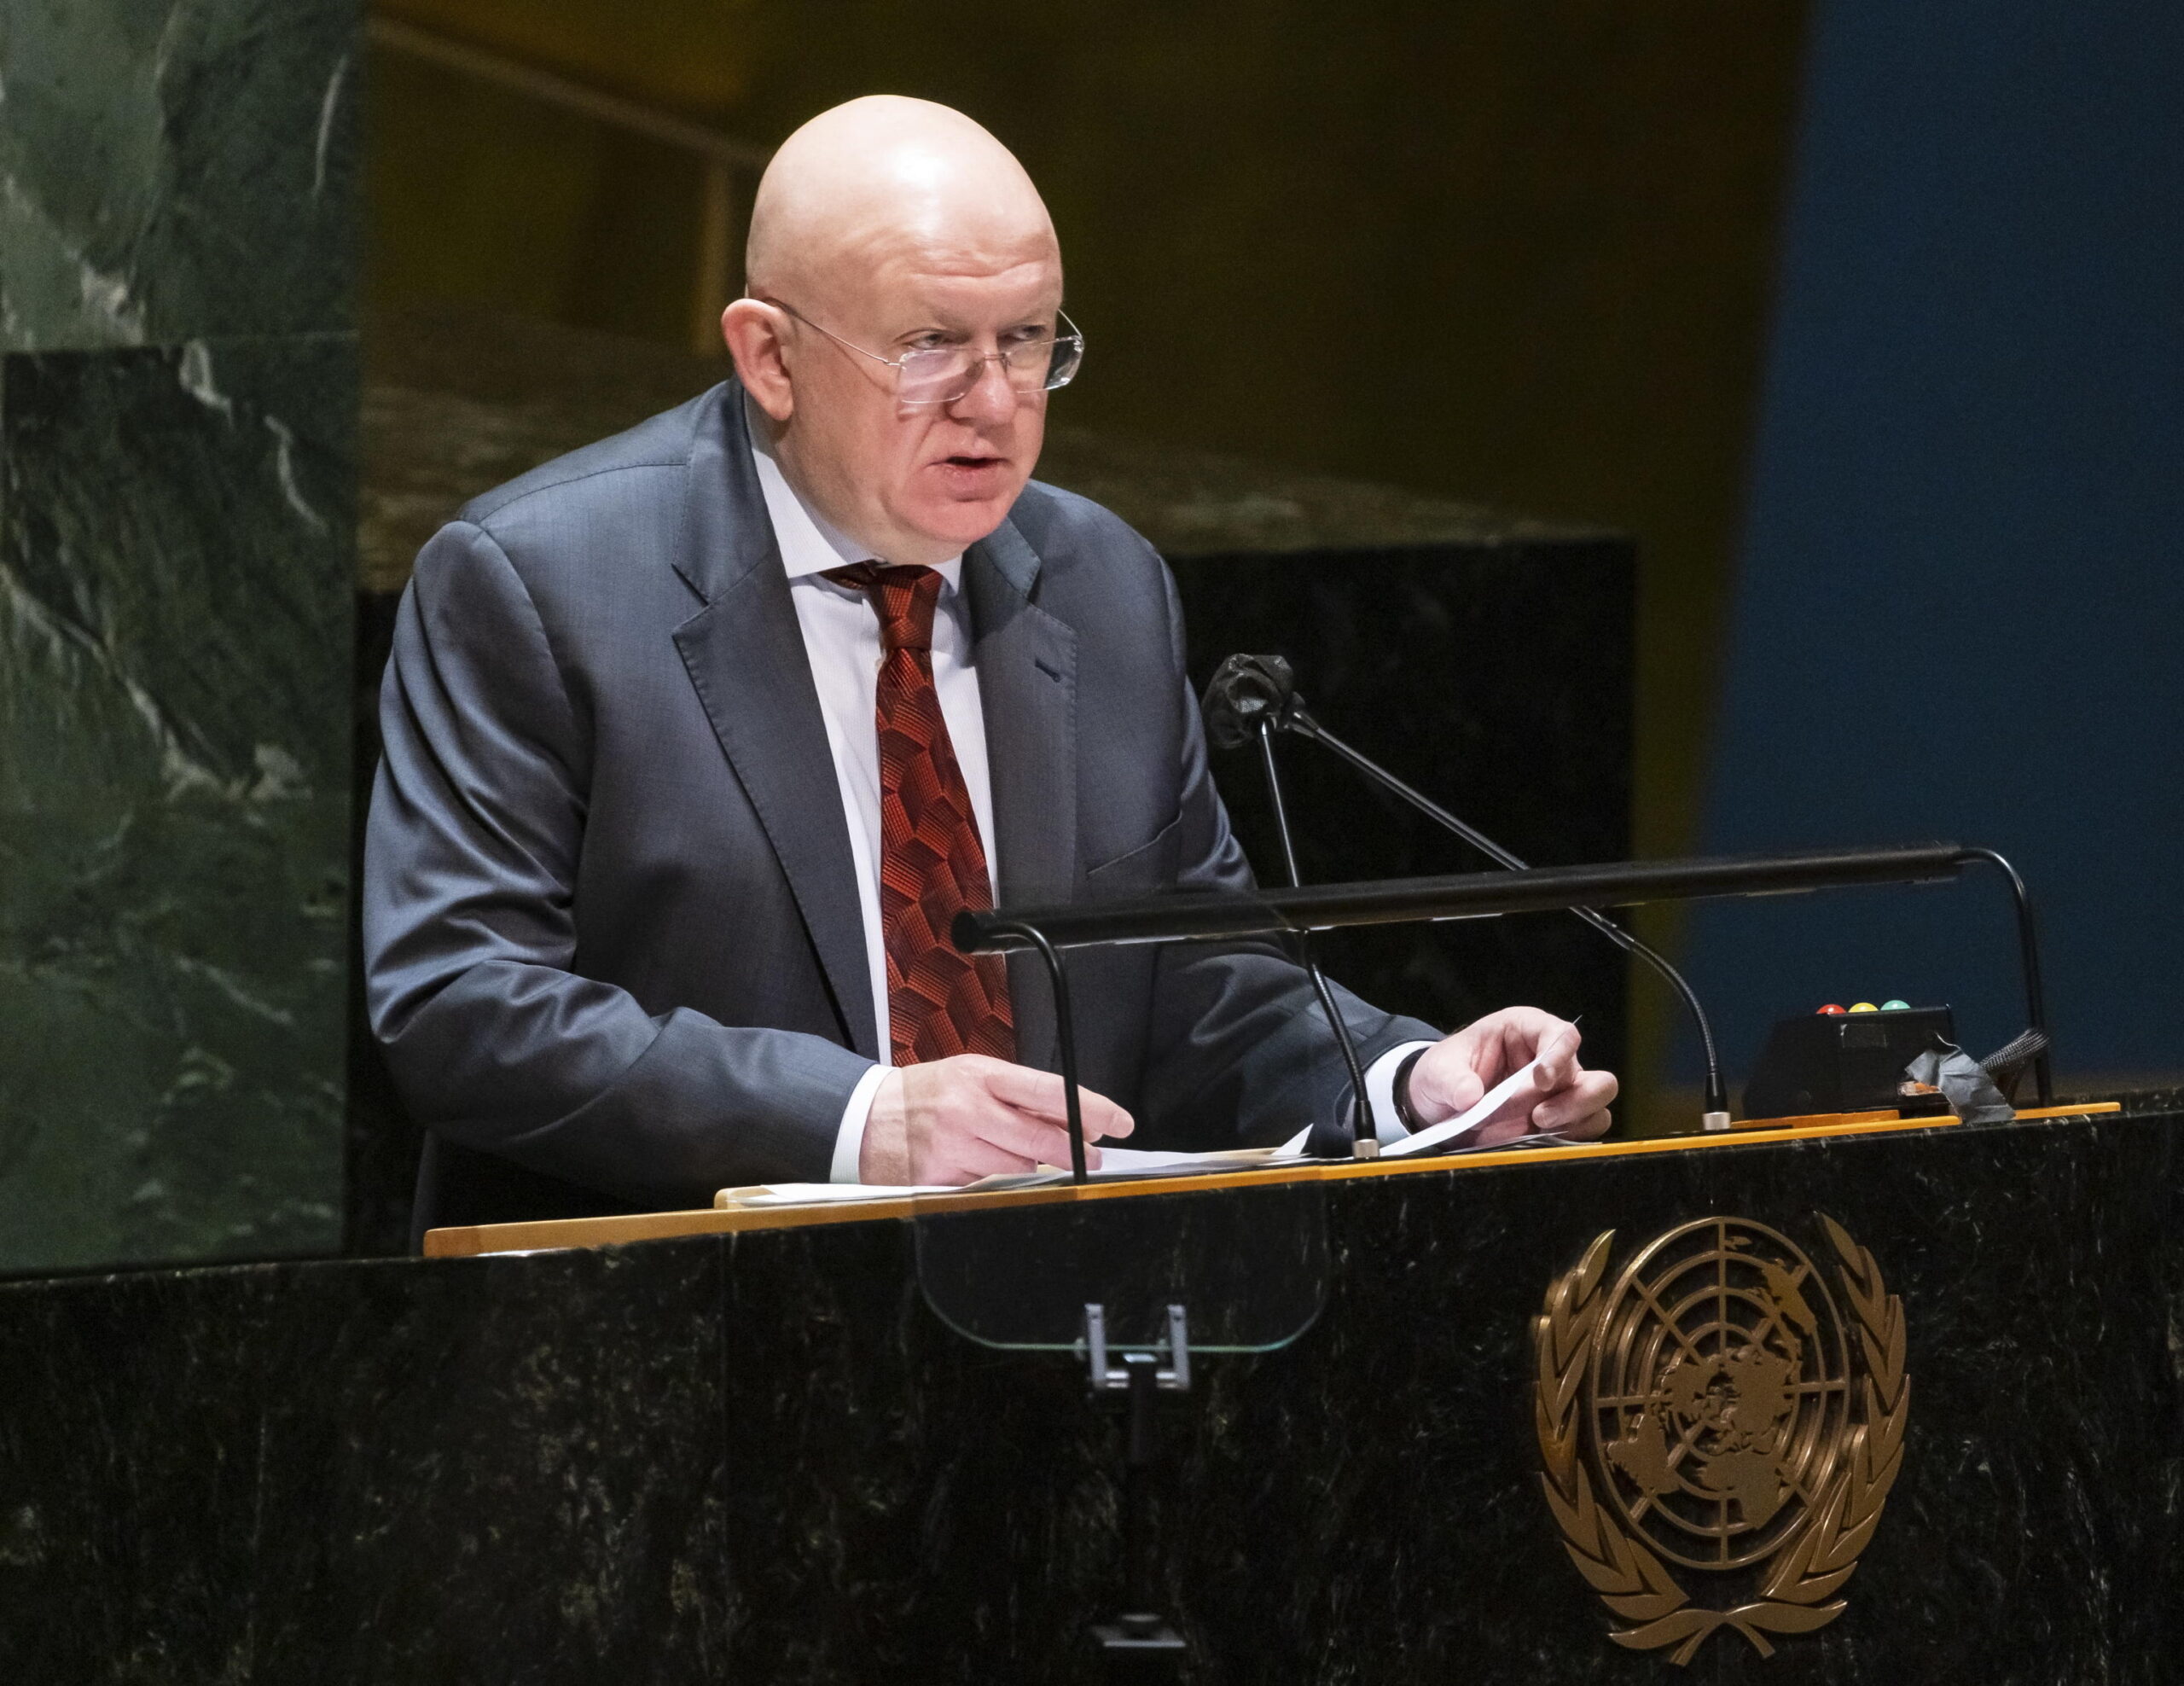 epa09844486 Russia's Ambassador to the U.N. Vassily Nebenzia addresses a United Nations General Assembly meeting where member countries are scheduled to debate and vote on two resolutions related to the humanitarian crisis being caused by RussiaÂ?s invasion of Ukraine at United Nations headquarters in New York, New York, USA, 23 March 2022. The United Nations Security Council is also set today to take up a resolution sponsored by Russia related to the humanitarian situation in Ukraine, but without referring to the war.  EPA/JUSTIN LANE